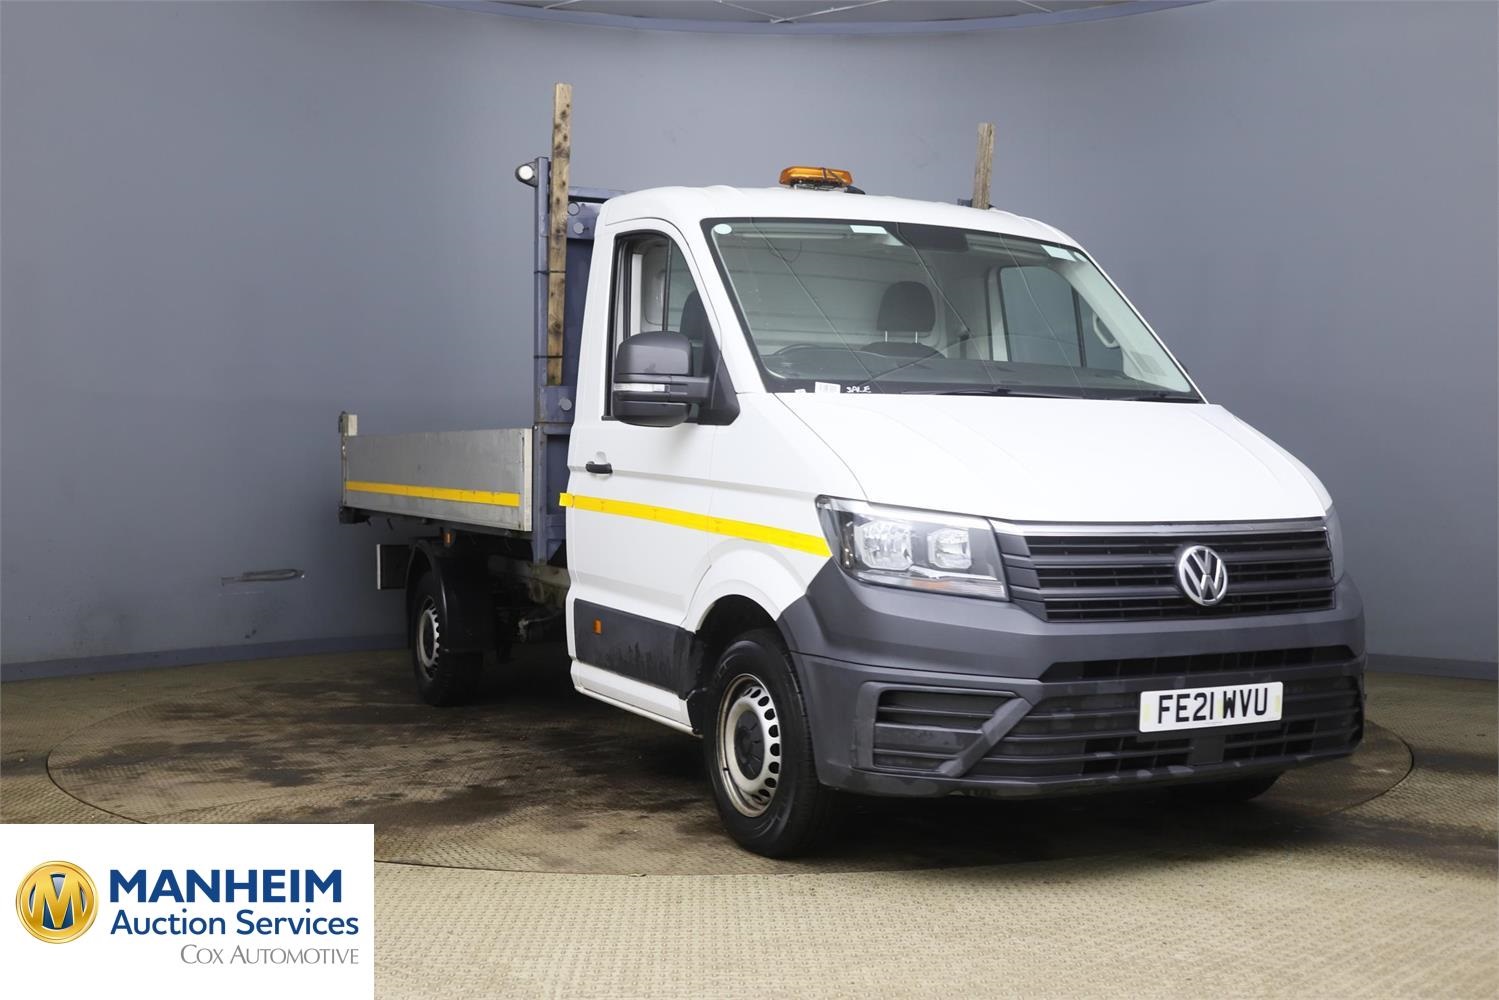 VOLKSWAGEN
CRAFTER CR35 MWB DIESEL FWD
2.0 TDI 102PS Startline Chassis Cab 2 Seats Single Cab